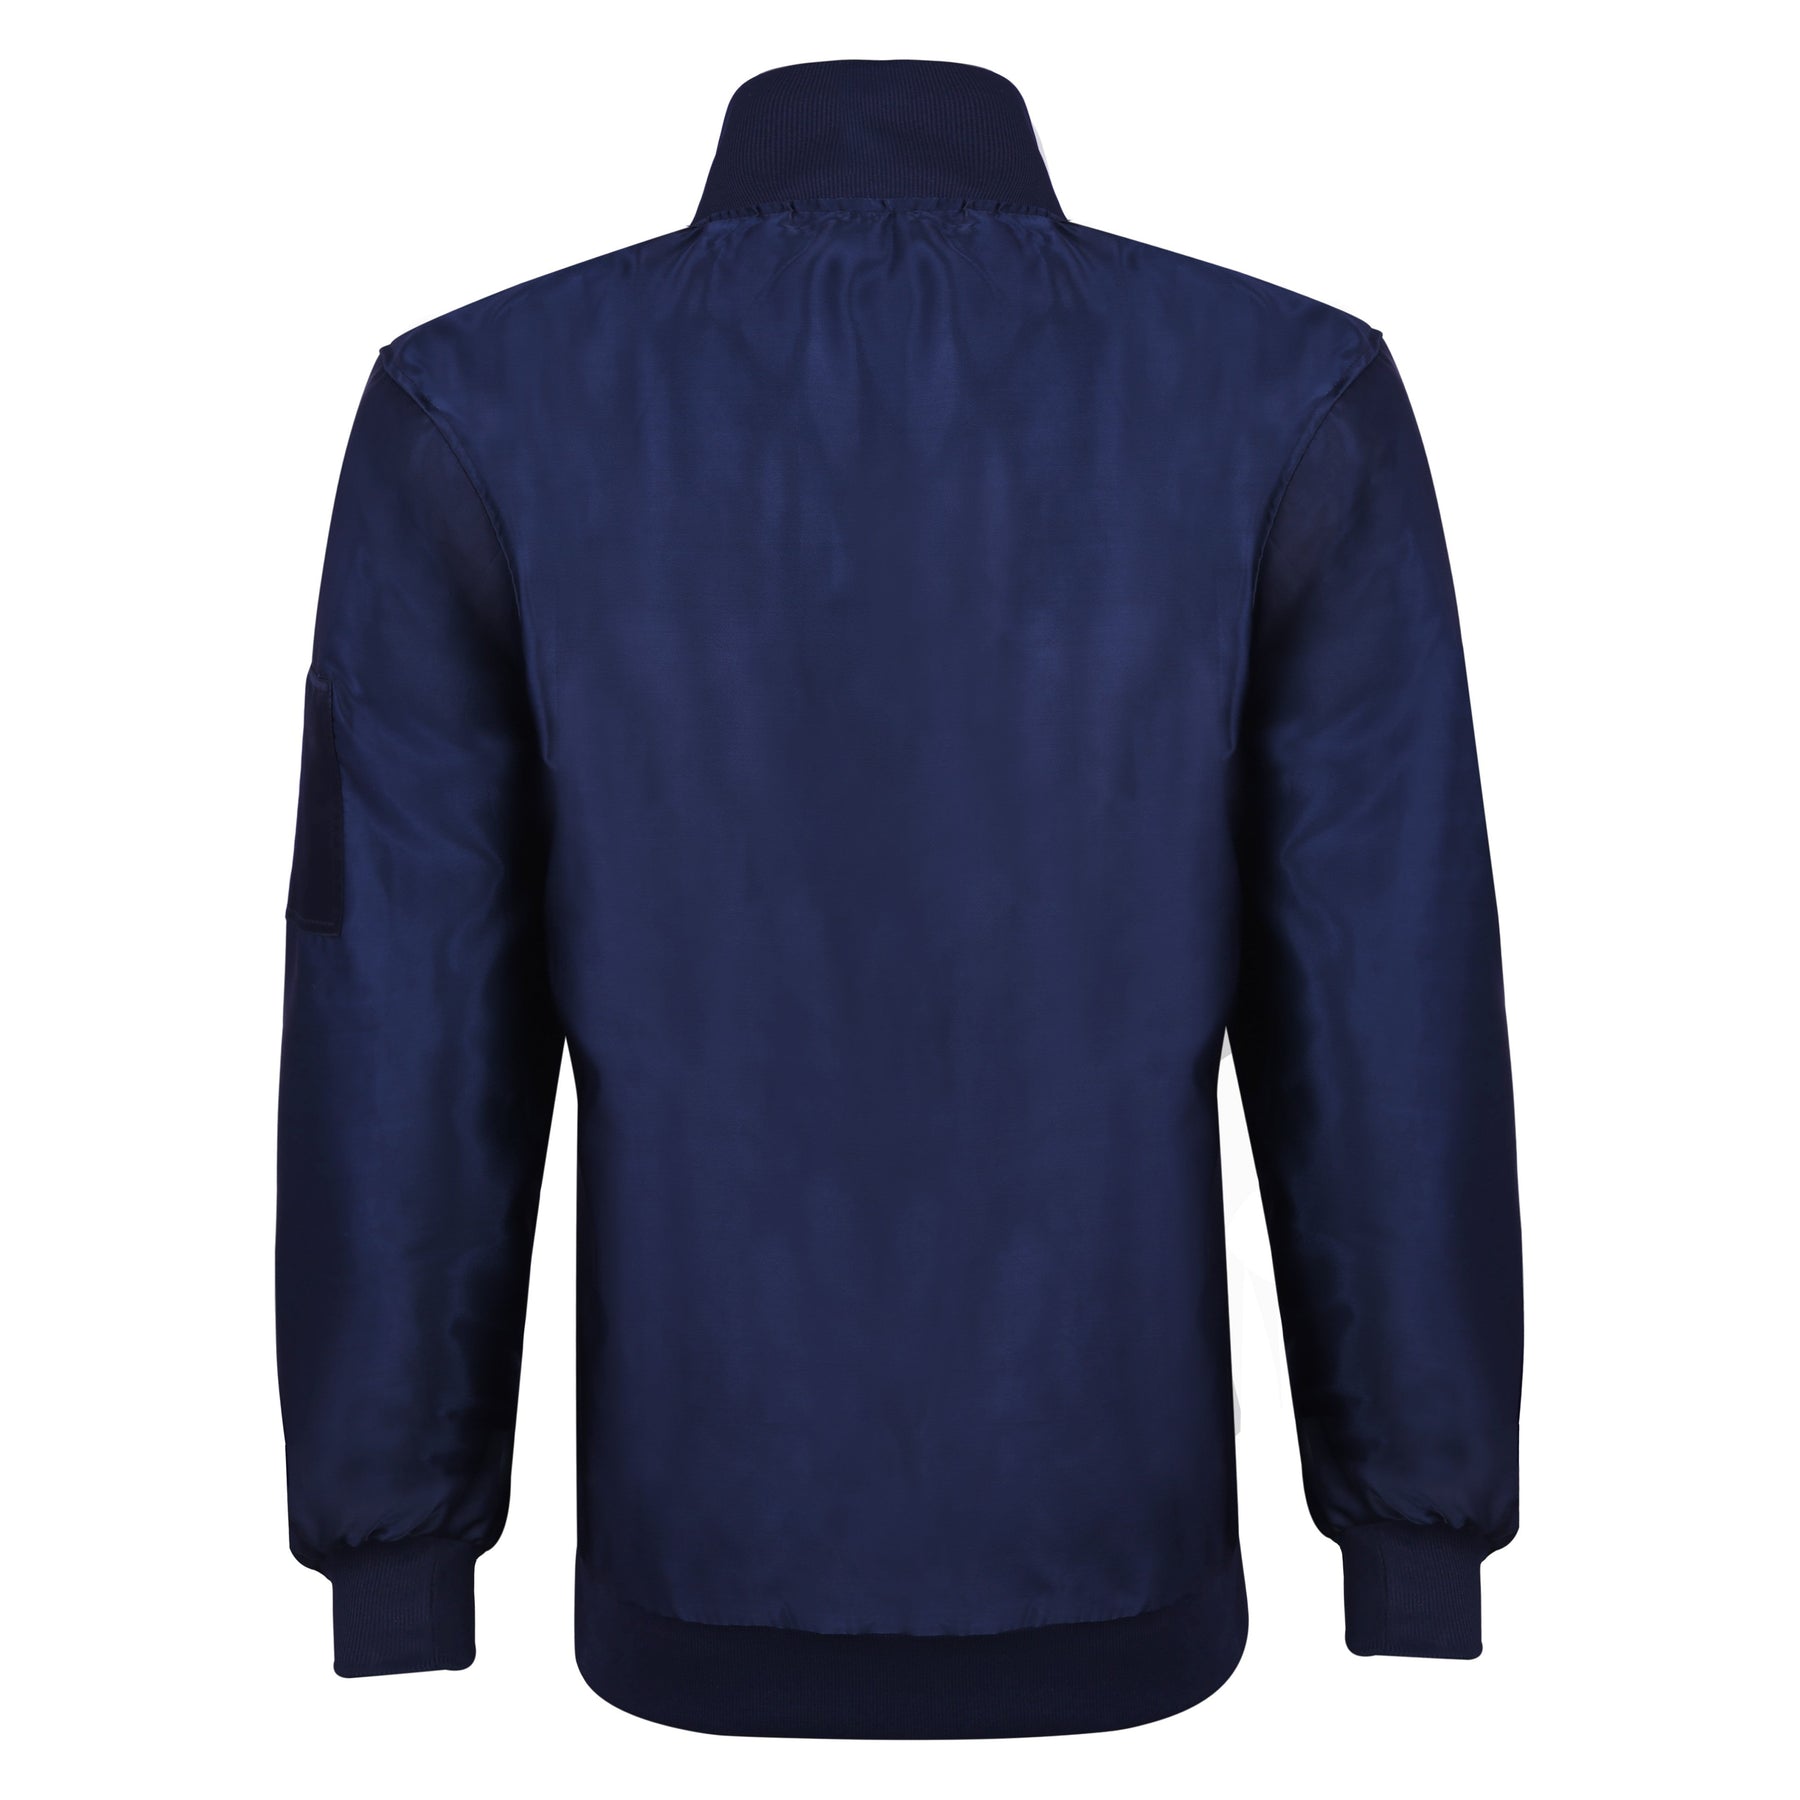 Widows Sons Jacket - Nylon Blue Color With Gold Embroidery - Bricks Masons